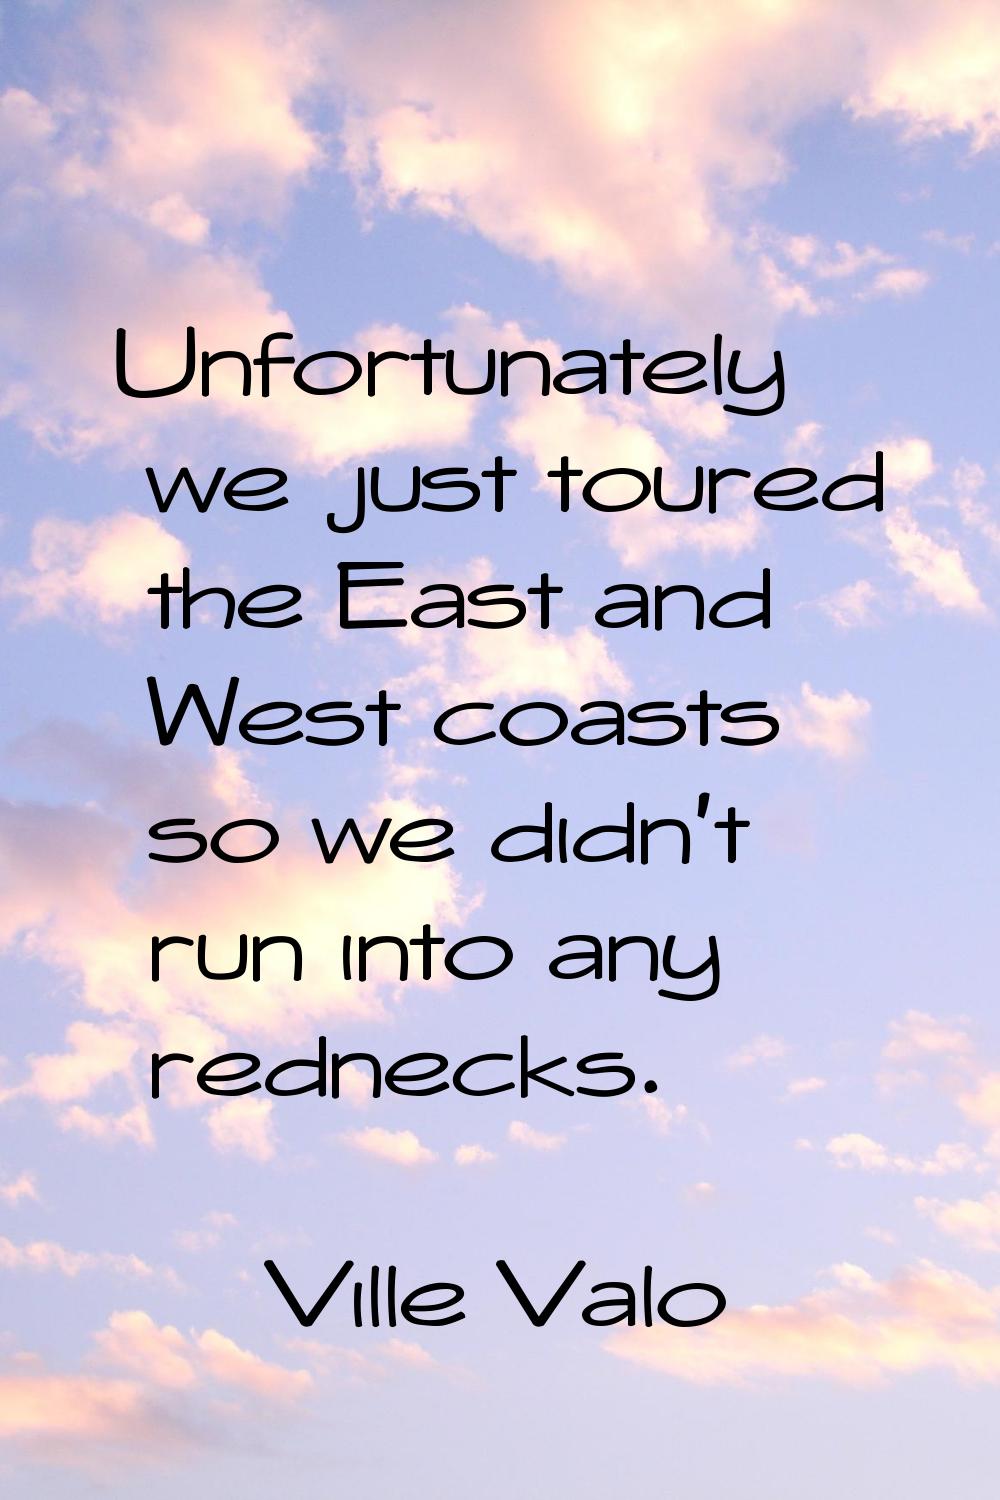 Unfortunately we just toured the East and West coasts so we didn't run into any rednecks.